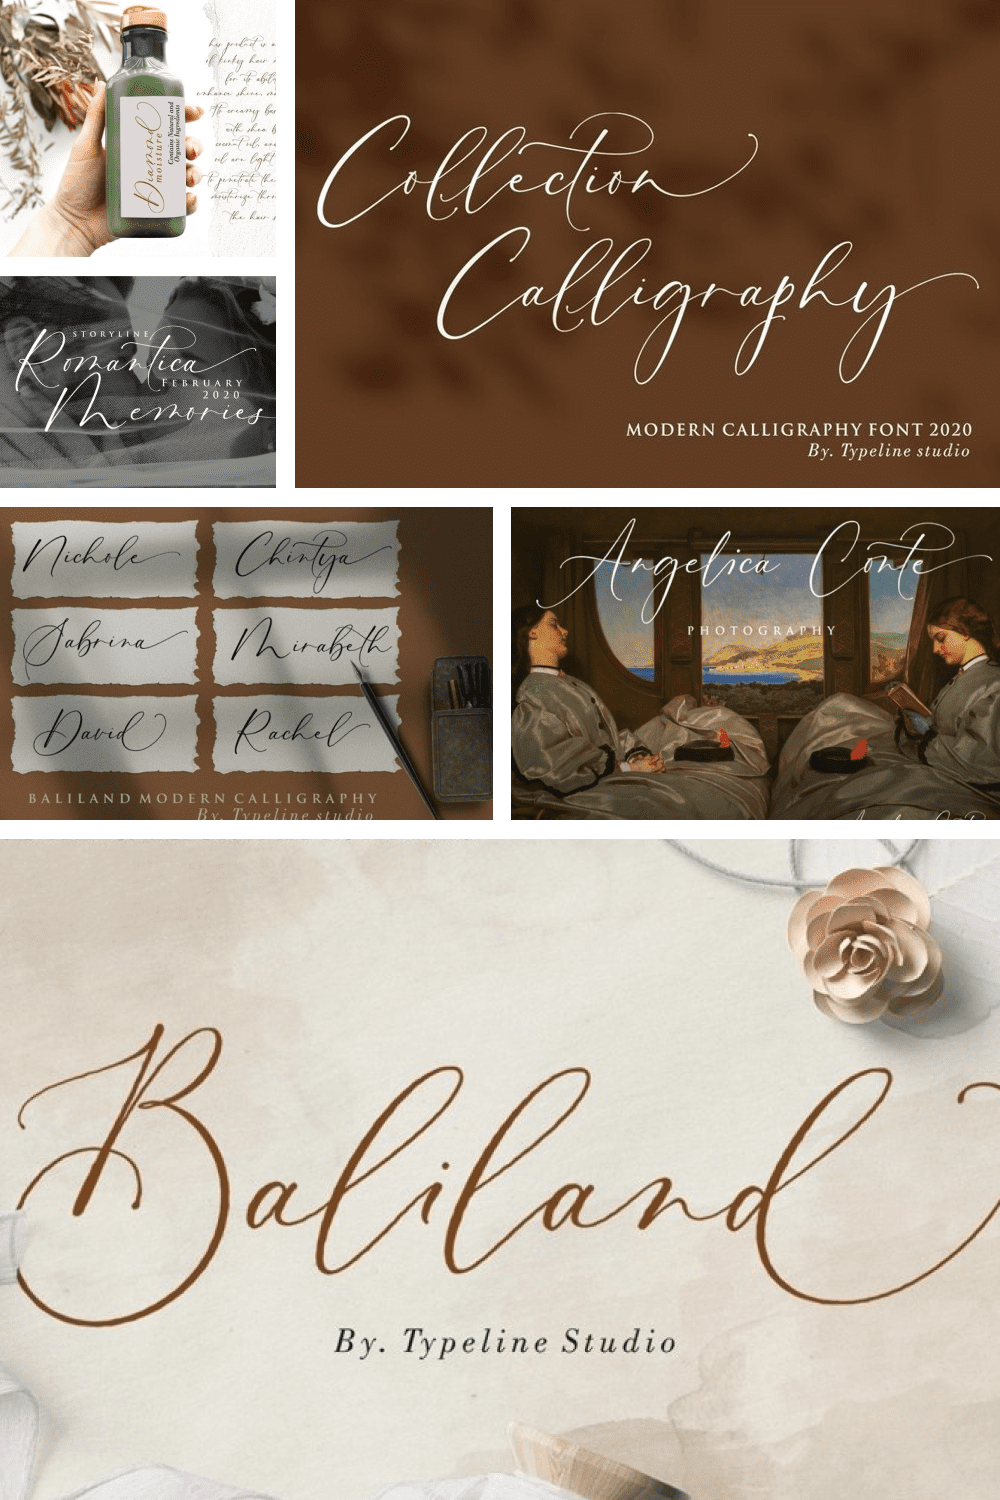 This is a modern Calligraphy font ant Baliland is inspired by the beauty of Bali insland which is full of romance.